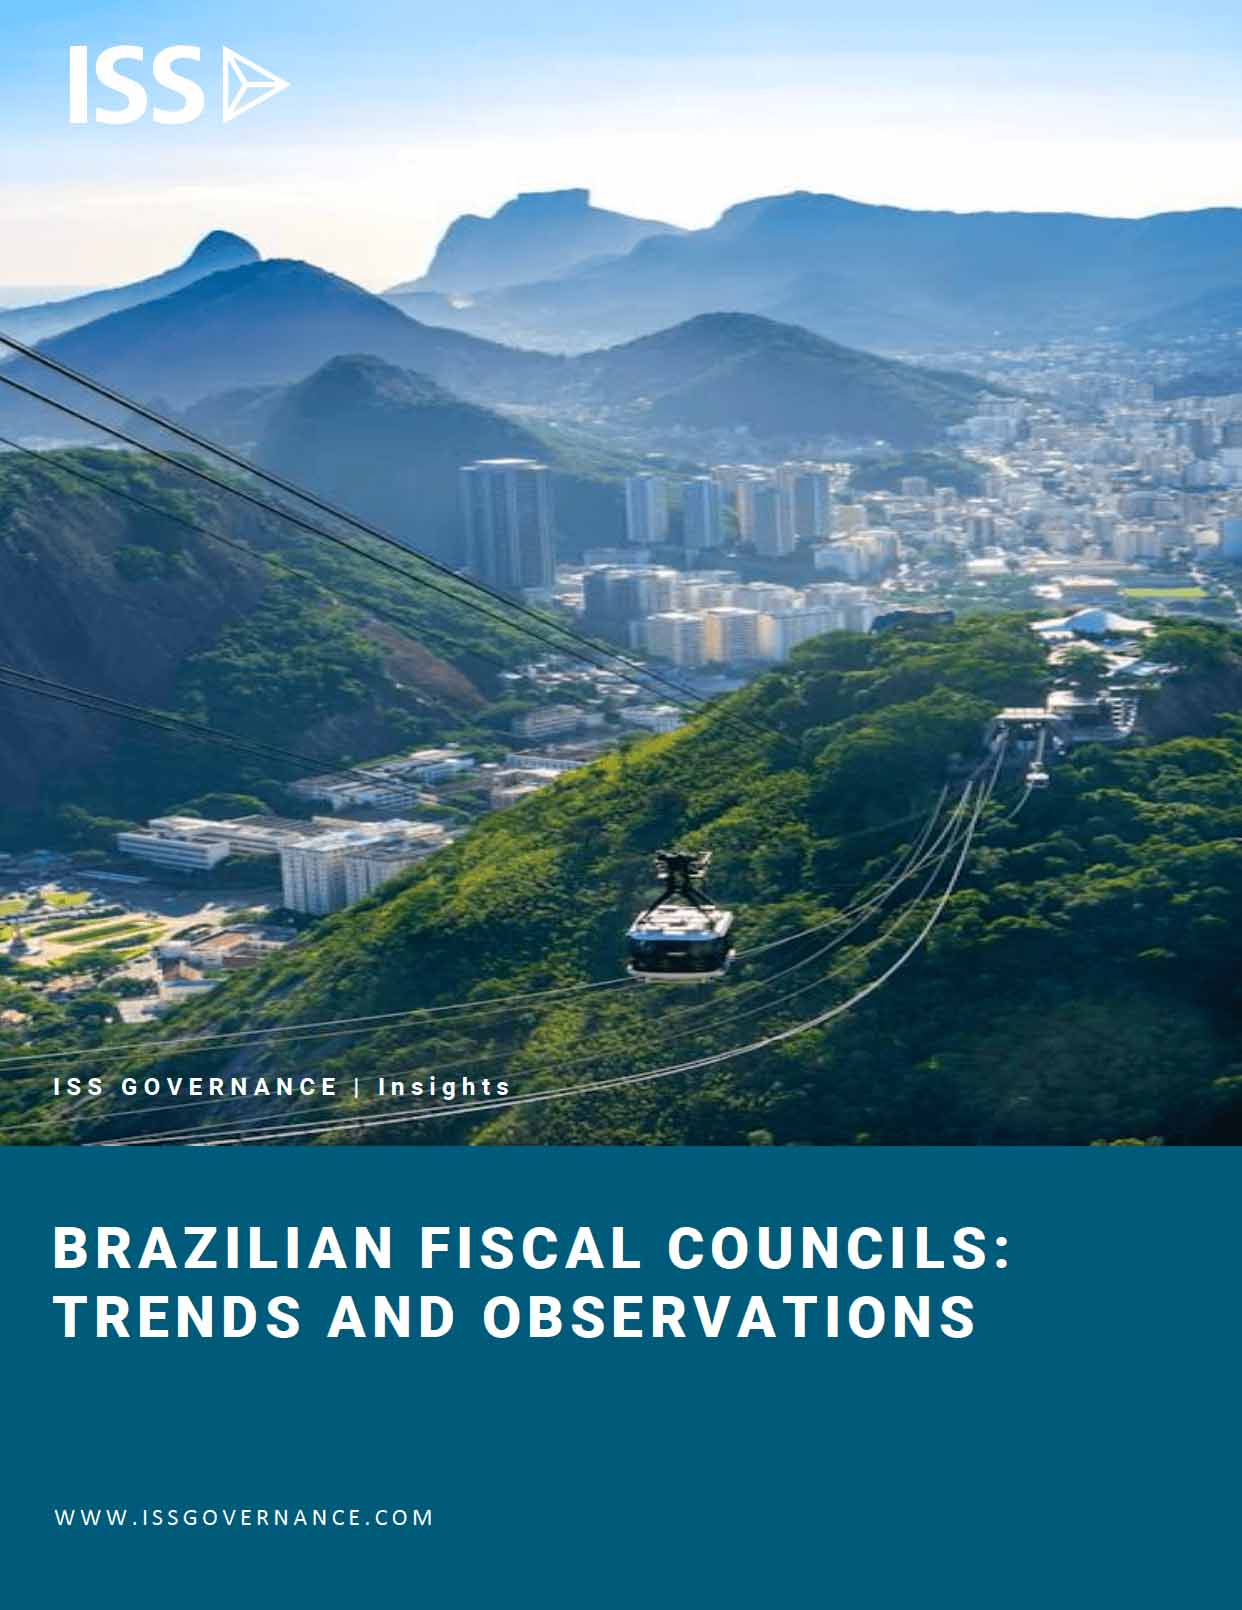 Brazilian Fiscal Councils: Trends and Observations